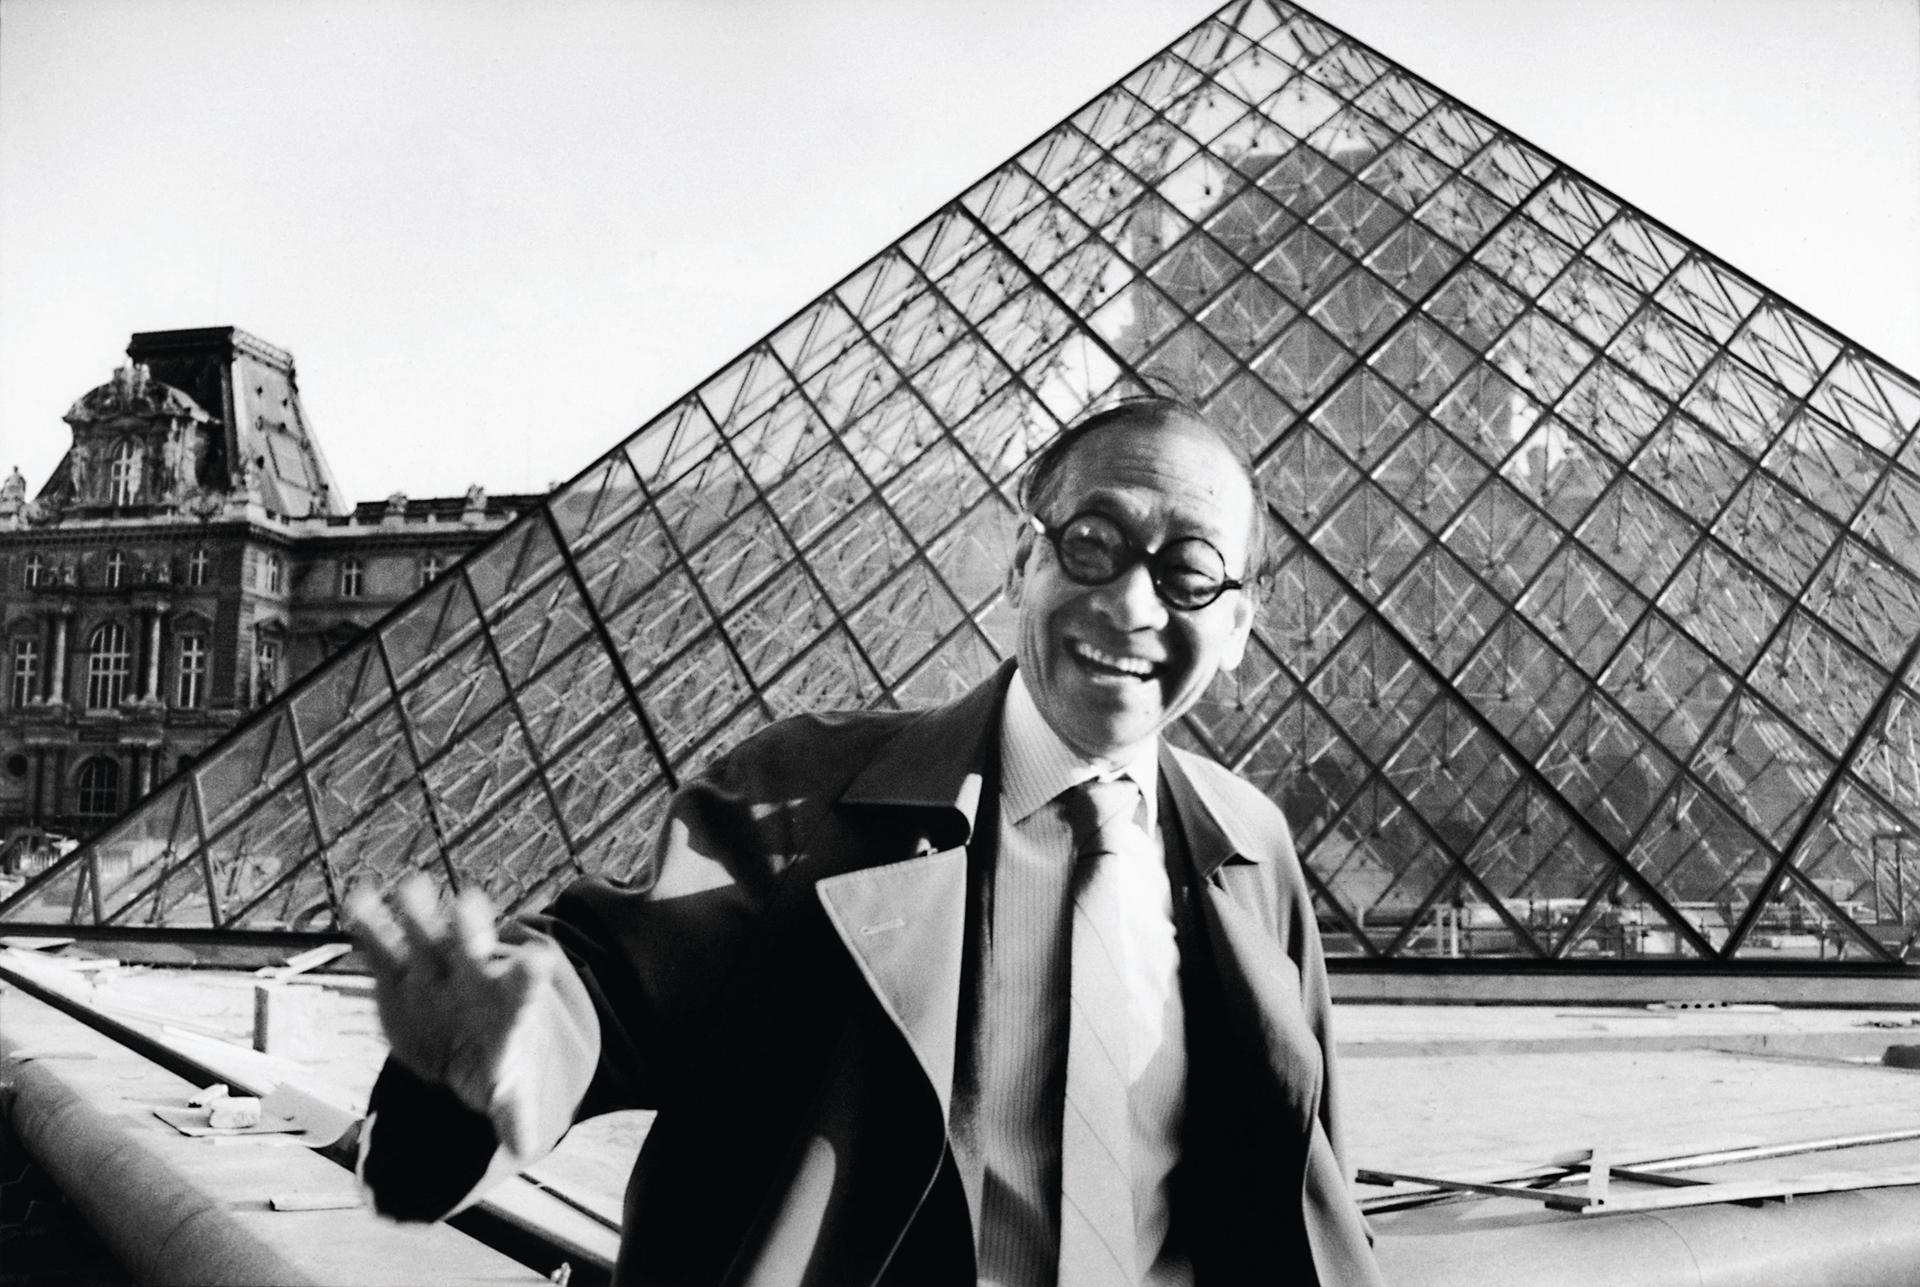 Ieoh Ming Pei in front of the Louvre pyramid © Marc Riboud